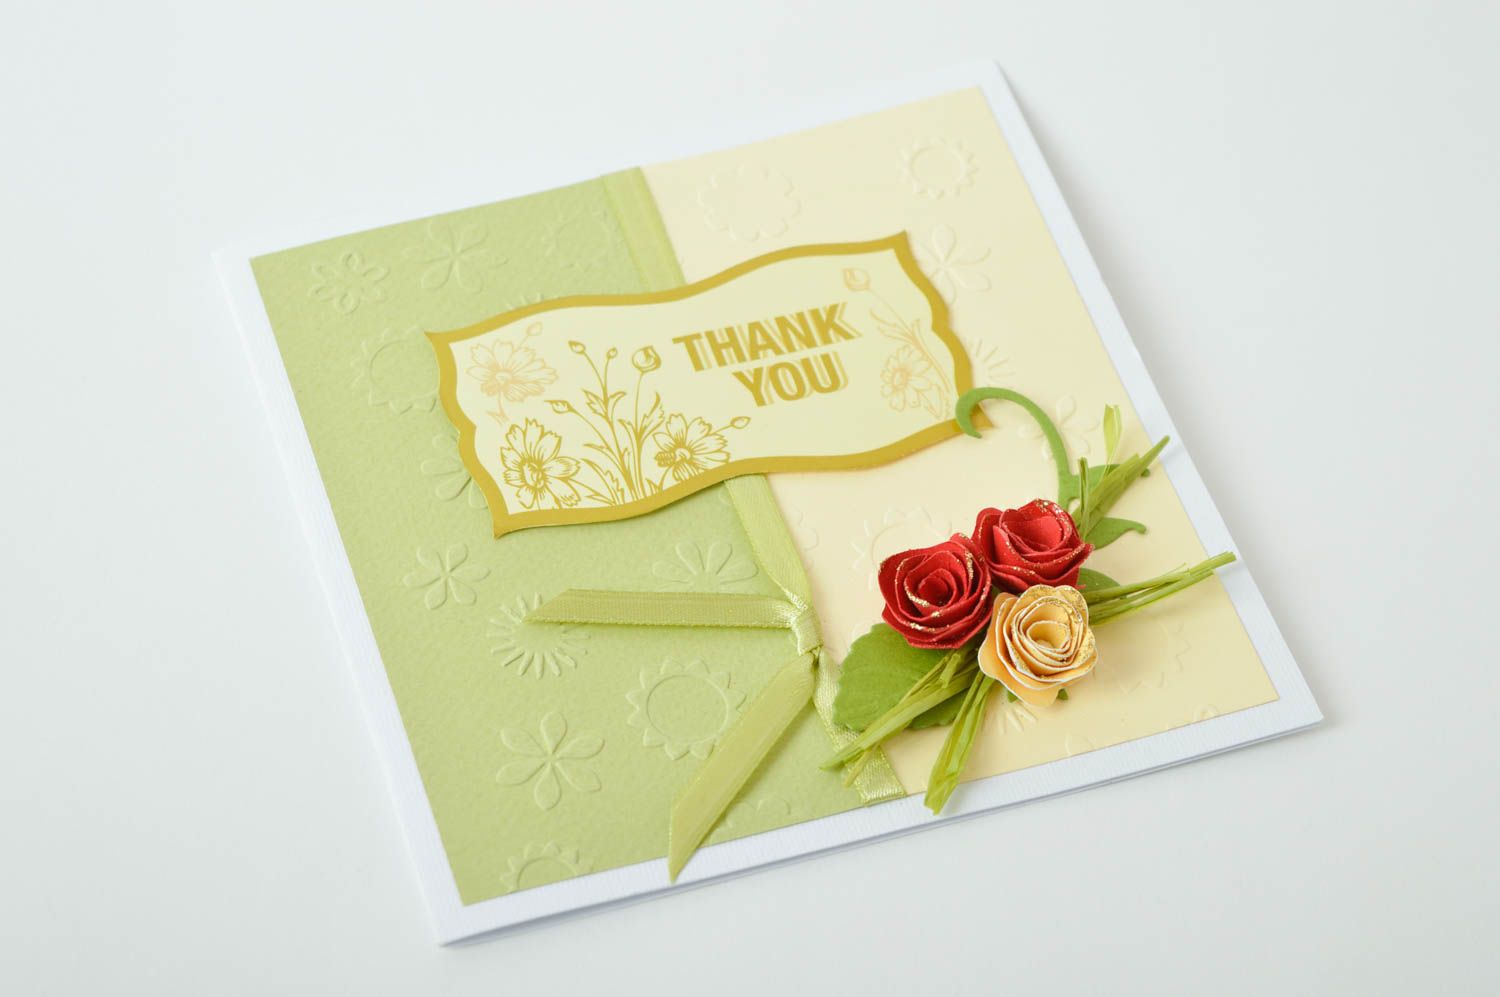 Homemade greeting card thank you card homemade cards souvenir ideas cool gifts photo 5